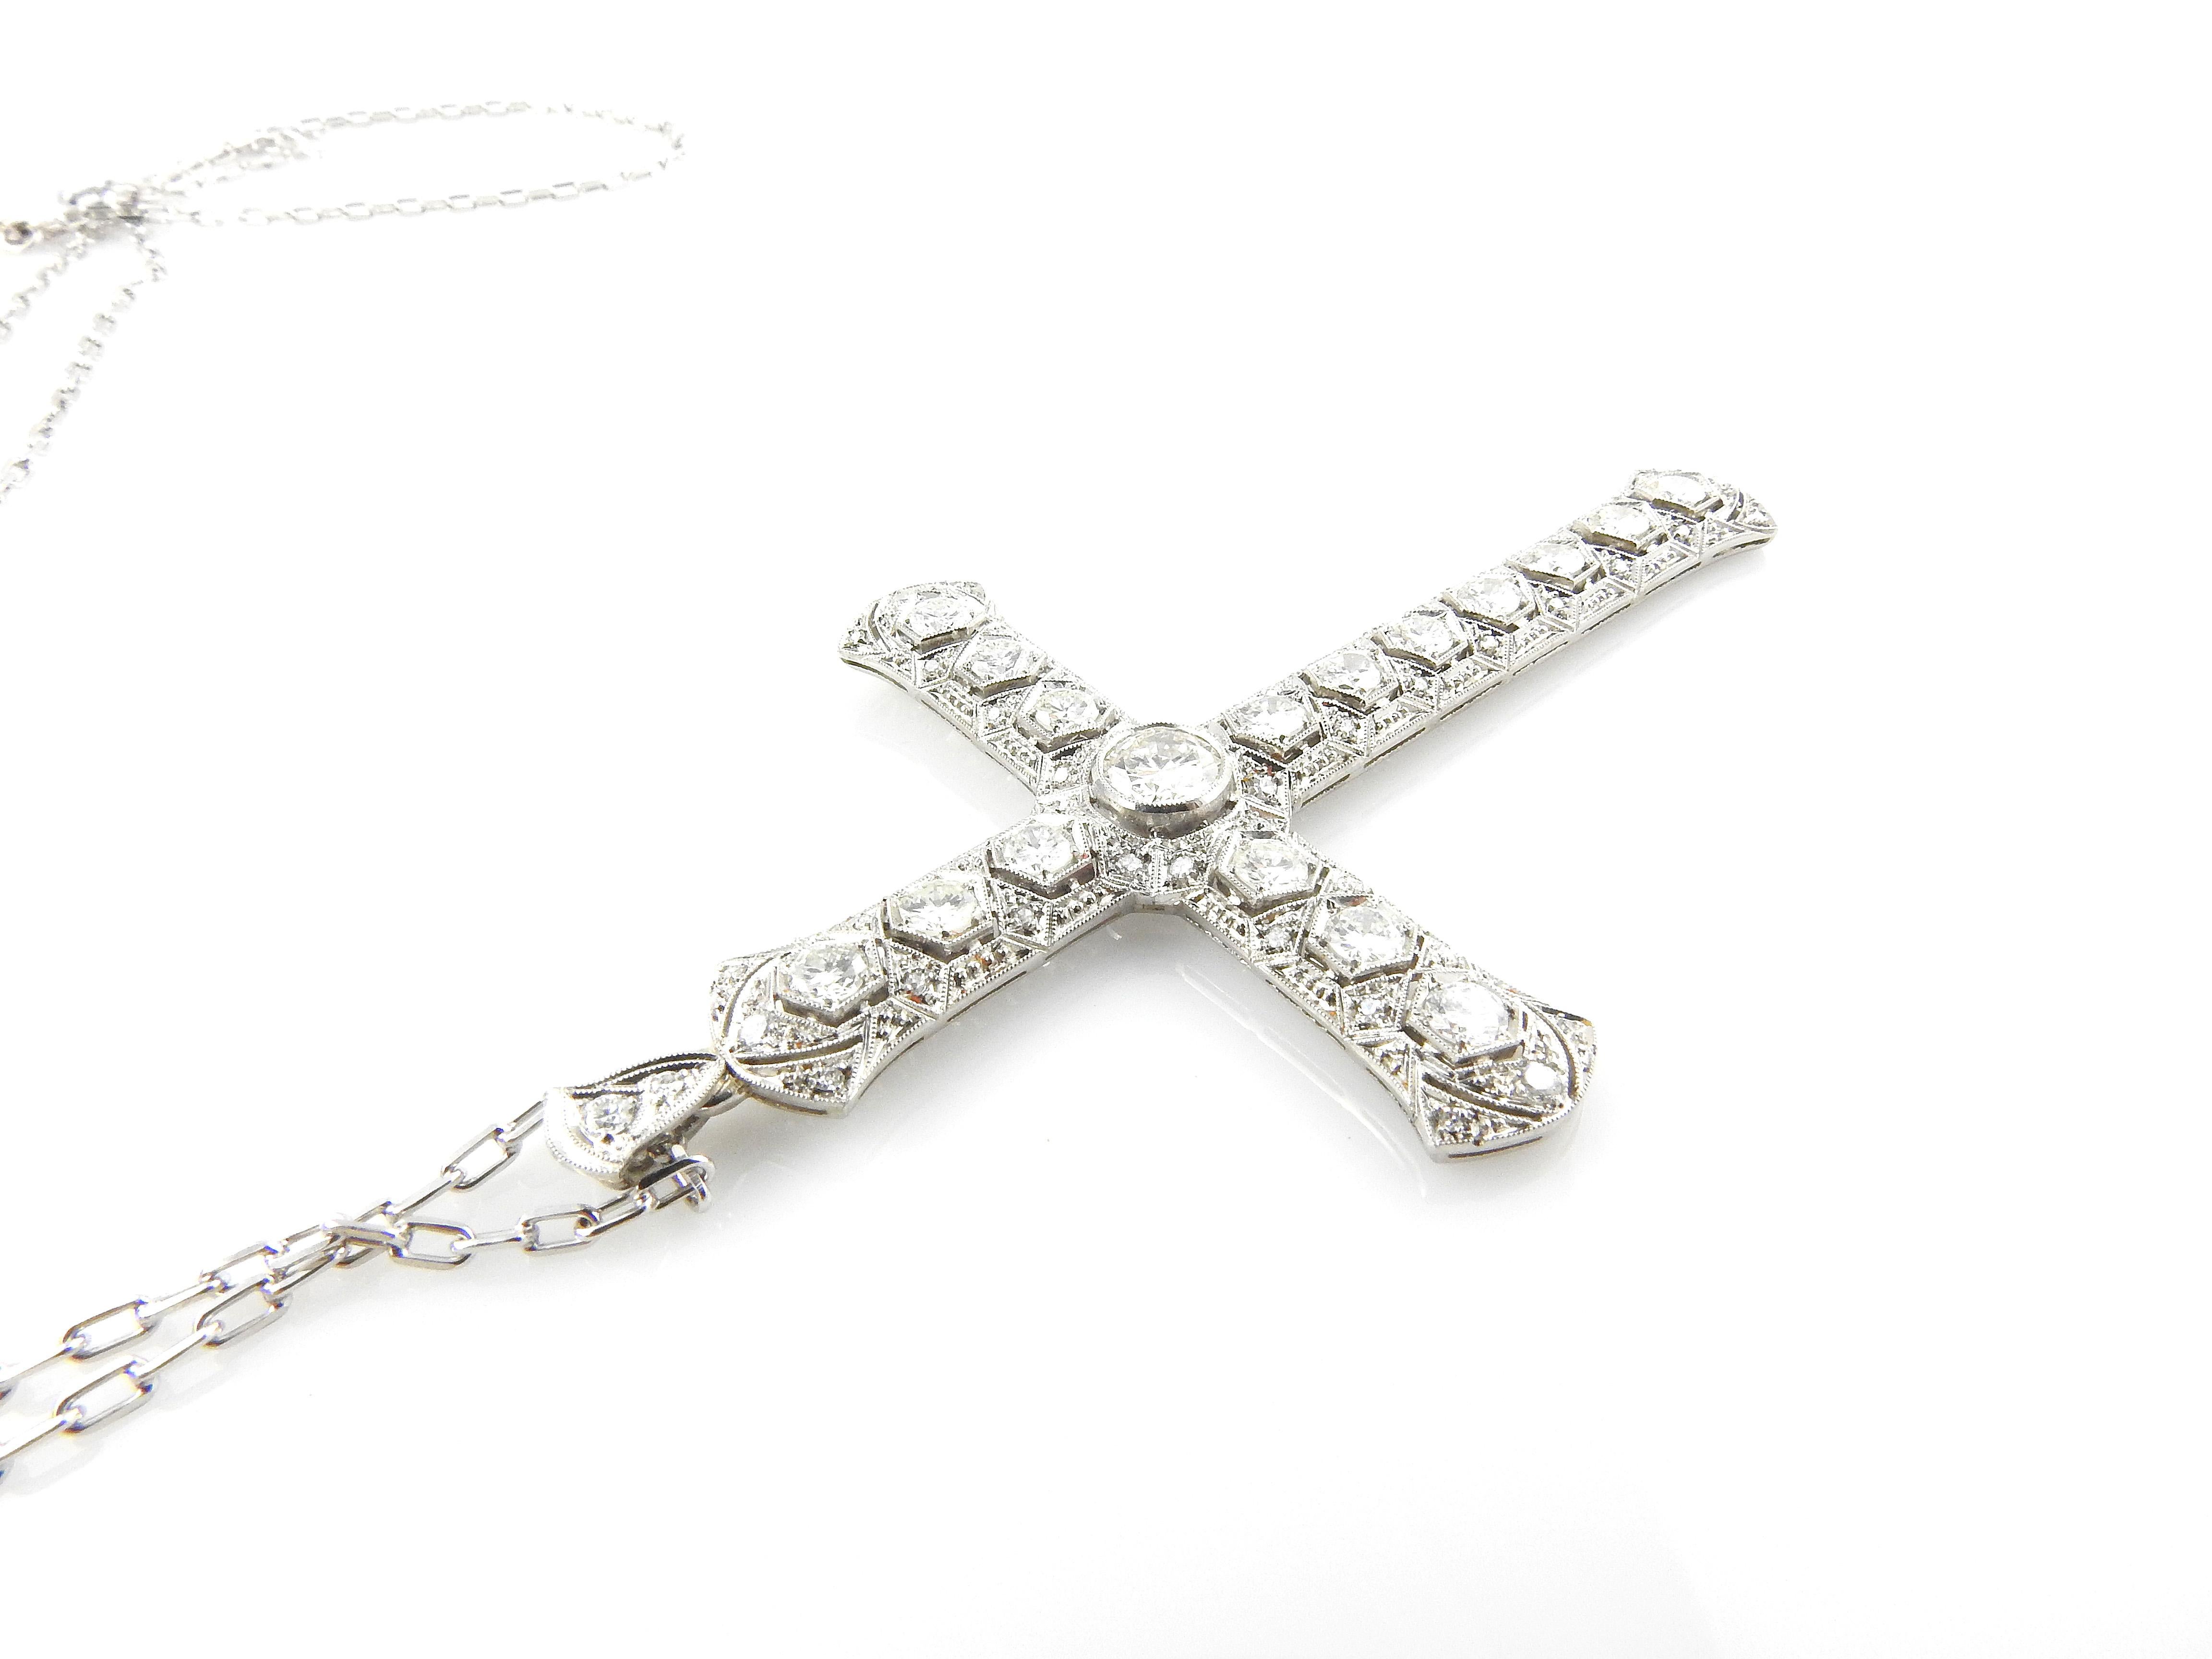 14K White Gold Large Diamond Cross Pendant Necklace 3.51cts #14328 In Good Condition For Sale In Washington Depot, CT